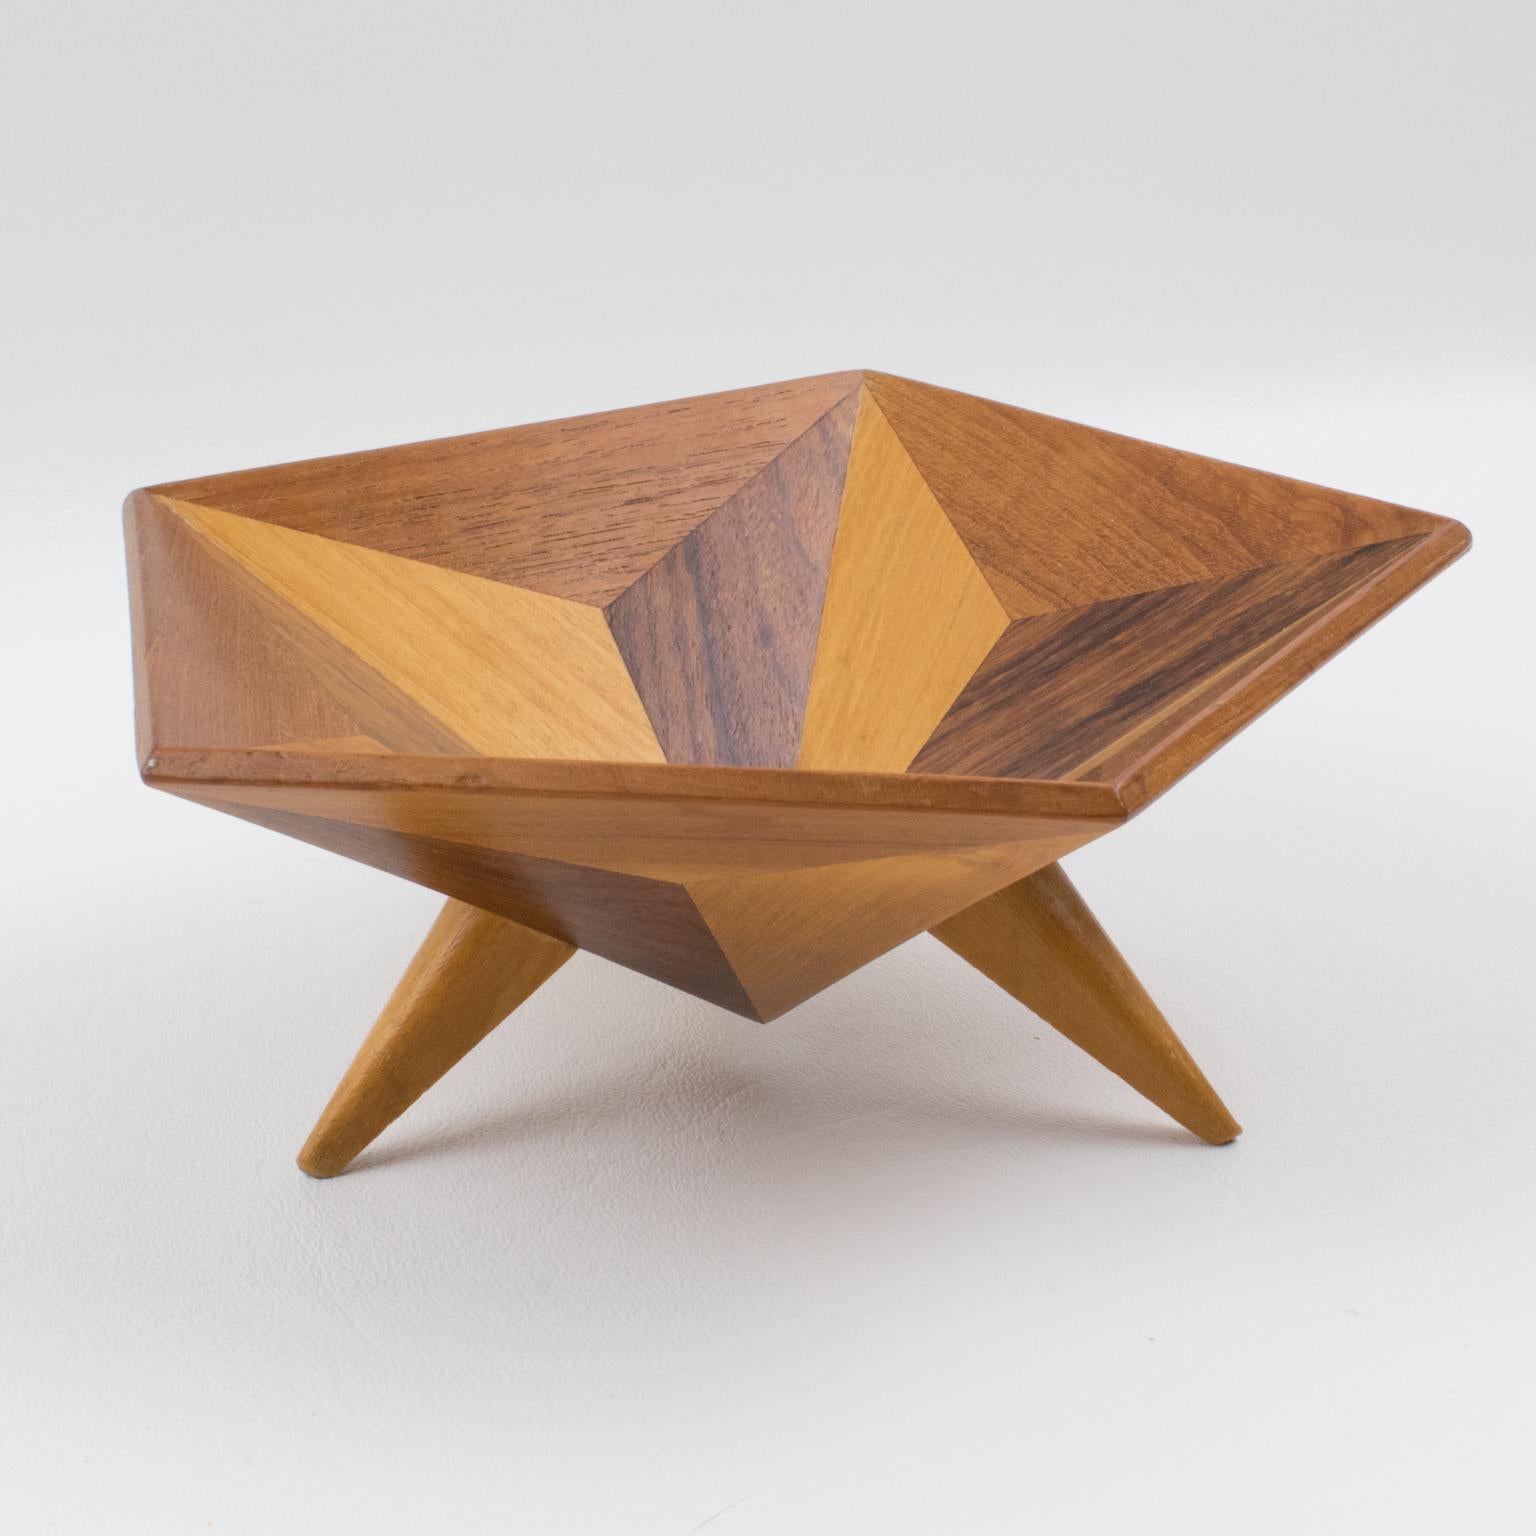 1960s Space Age Danish Wood Bowl Centerpiece Catchall 4